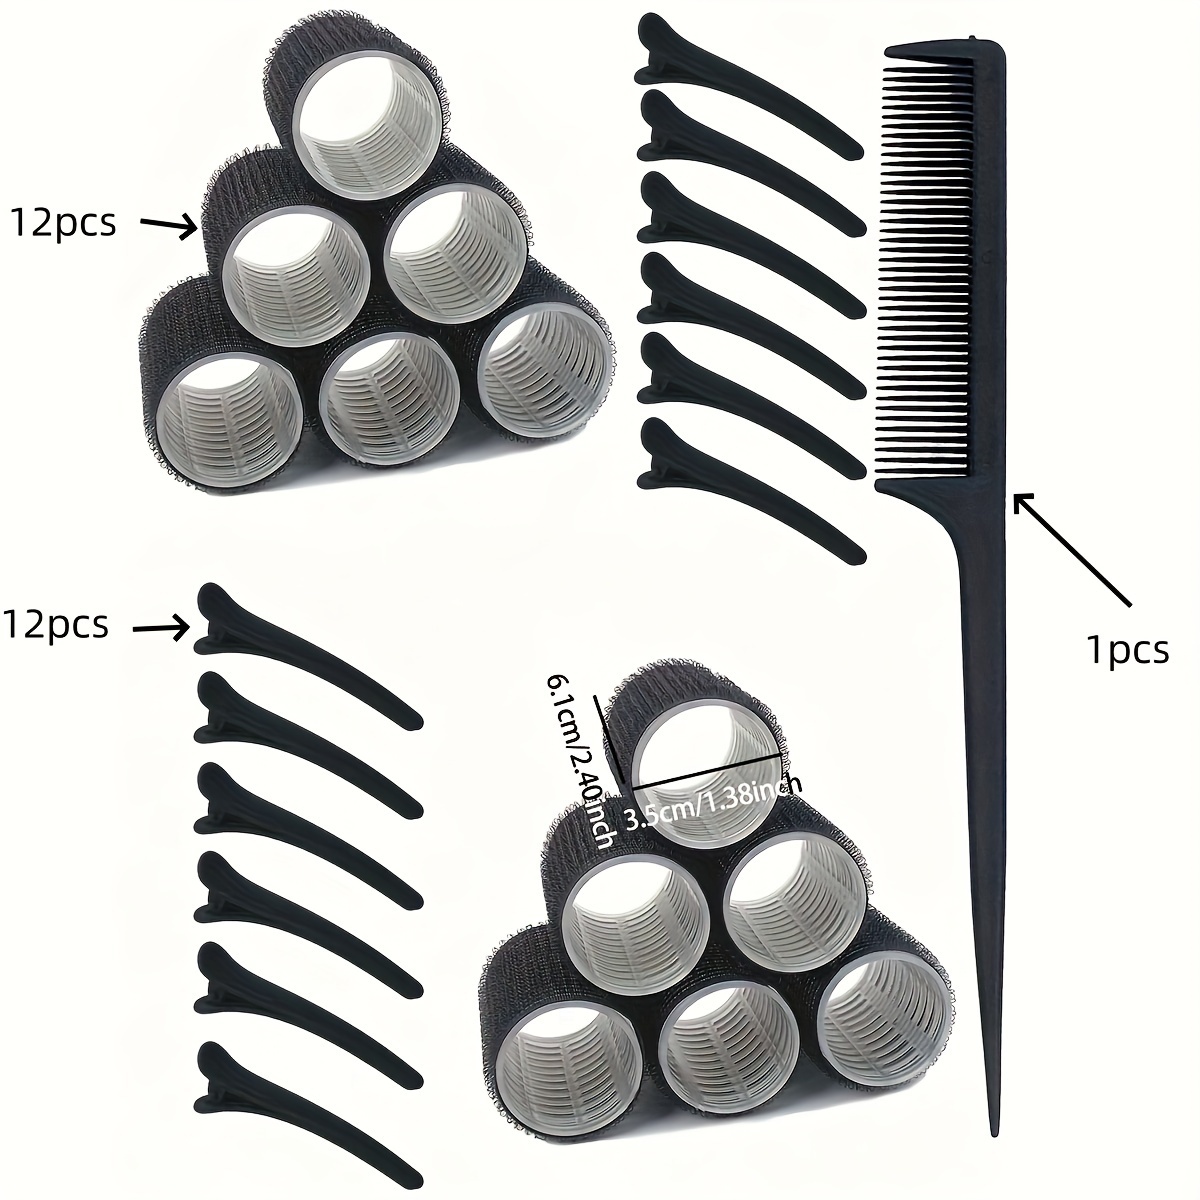 

25pcs/set Styling Hair Accessories Kit Heatless Hair Curlers Volumizing Hair Root Rollers Duckbill Clips Pointed Tail Fine Tooth Comb Suitable For Women And Daily Uses